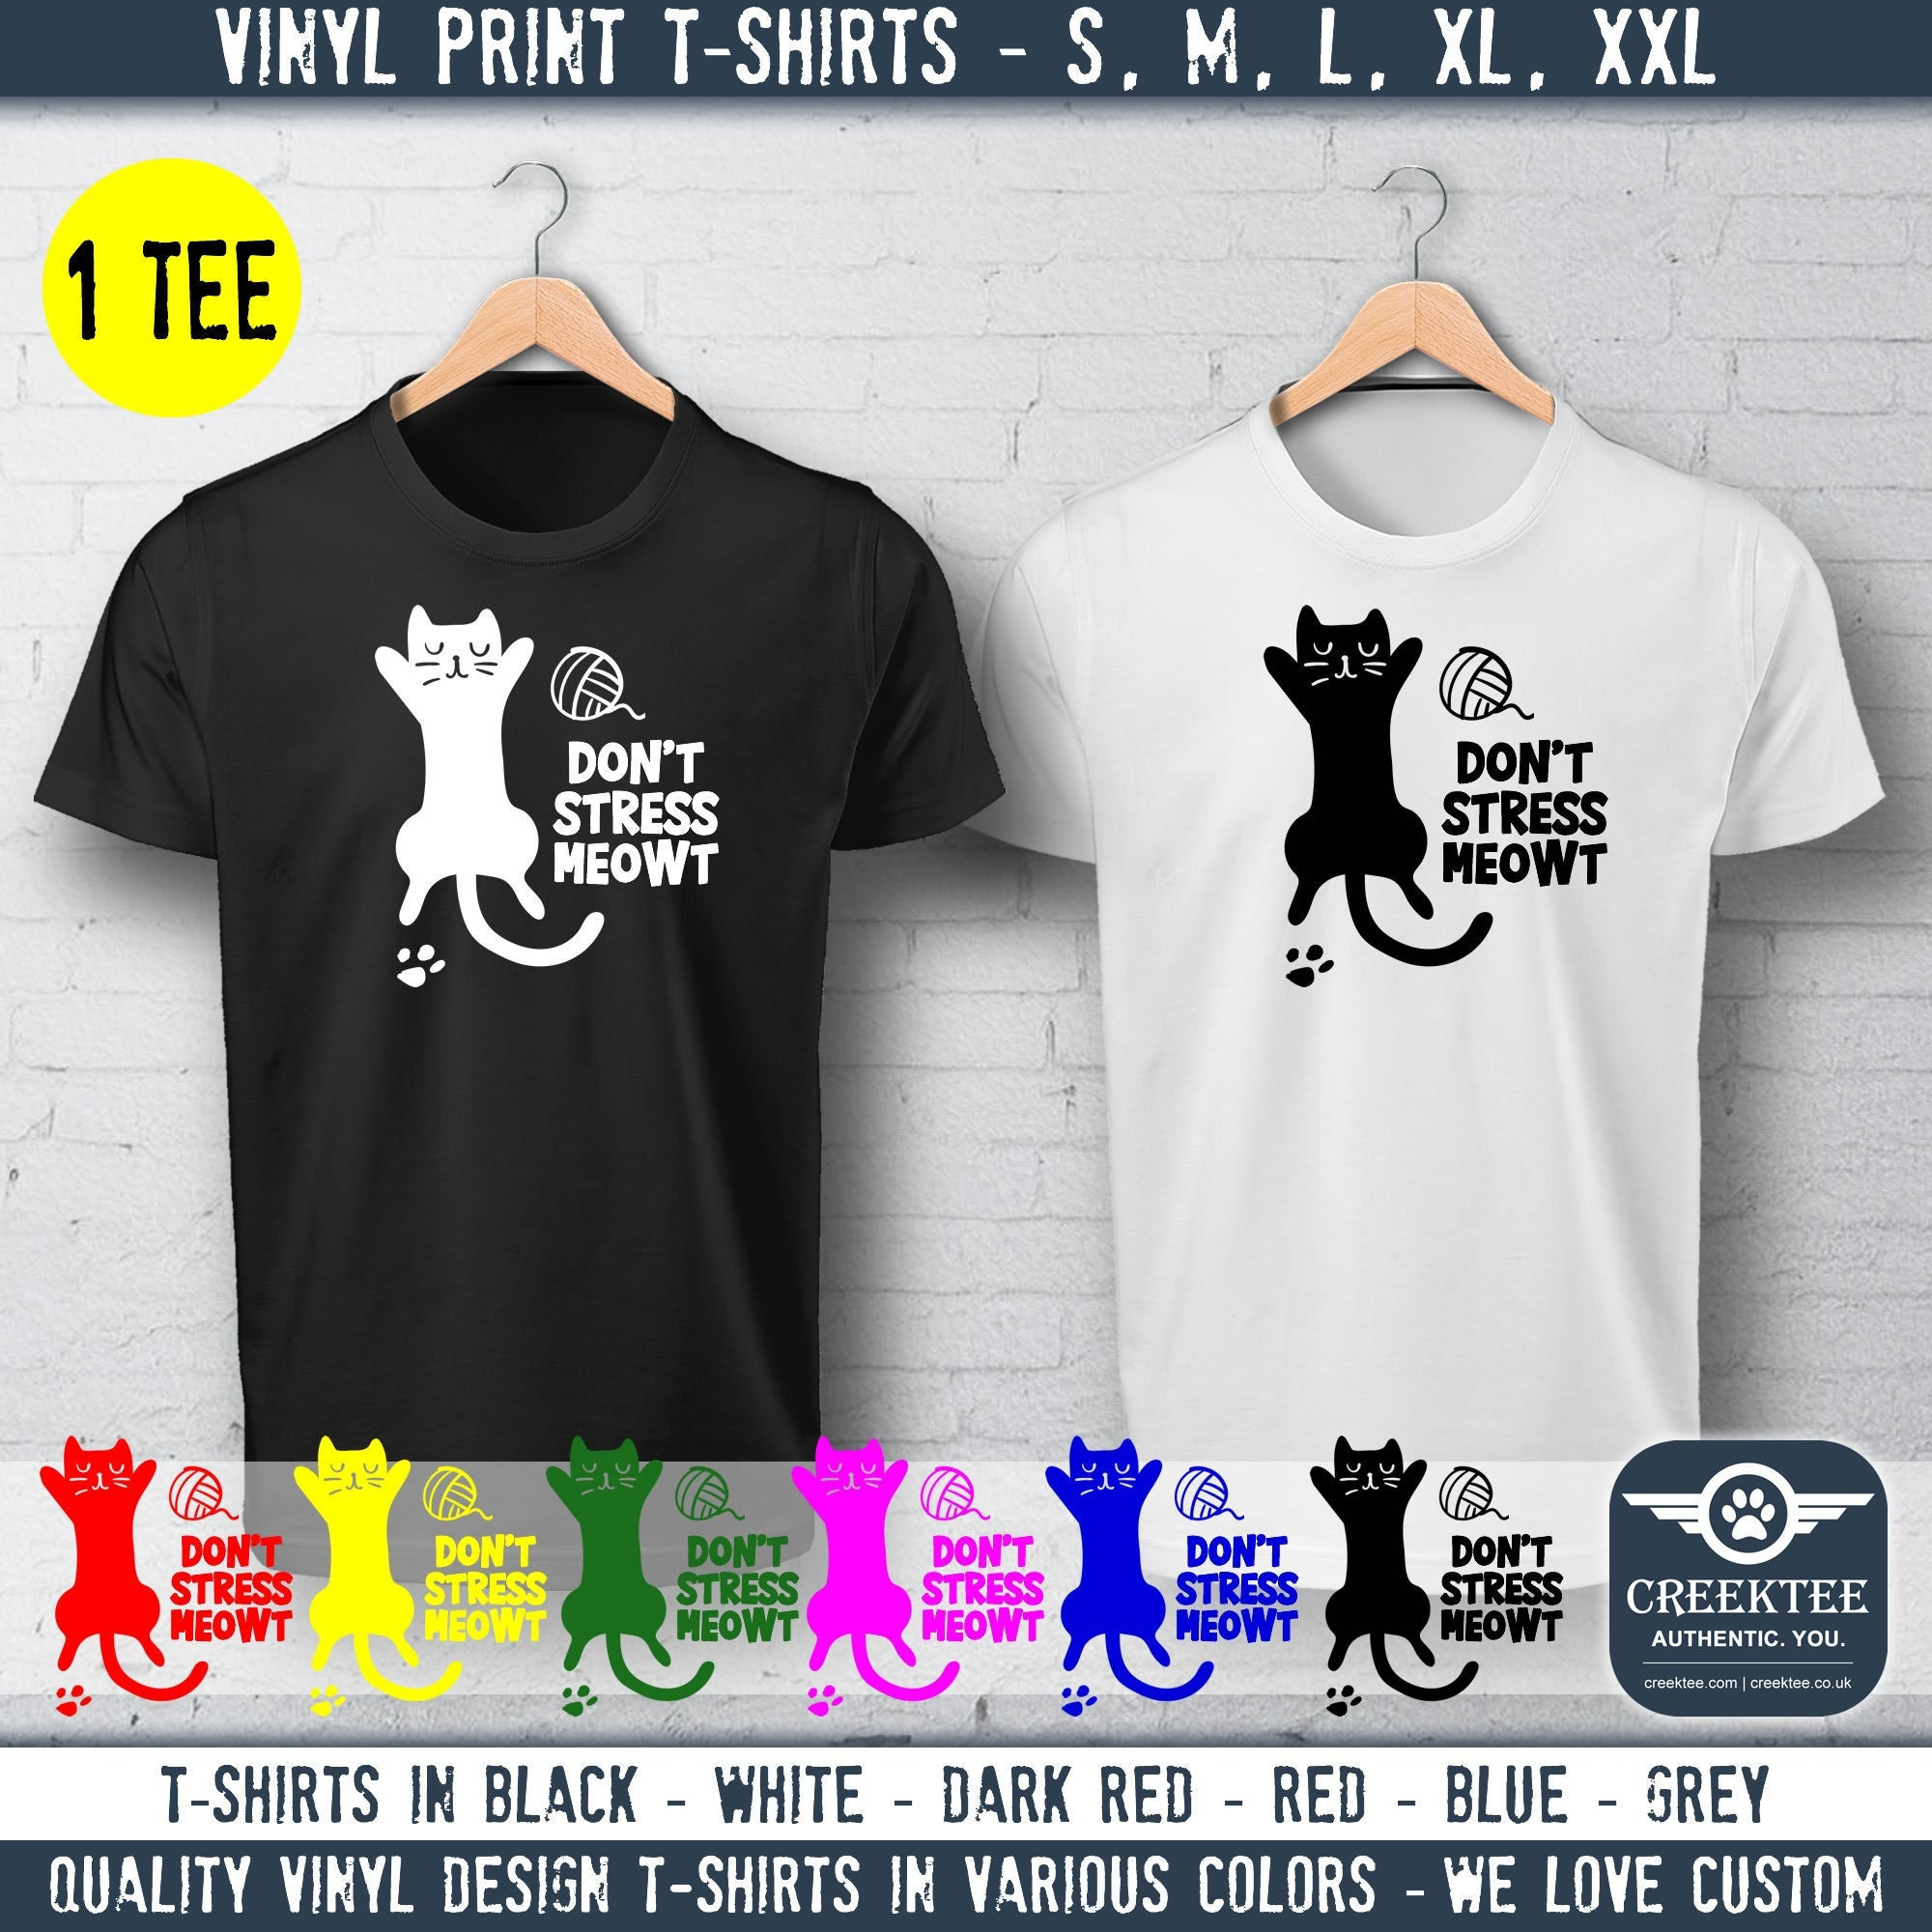 Don't Stress Meowt Vinyl Print T-shirt Unisex Funny t-shirt, Customize your tee. Ask us! - 1 T-Shirt of your color and vinyl color